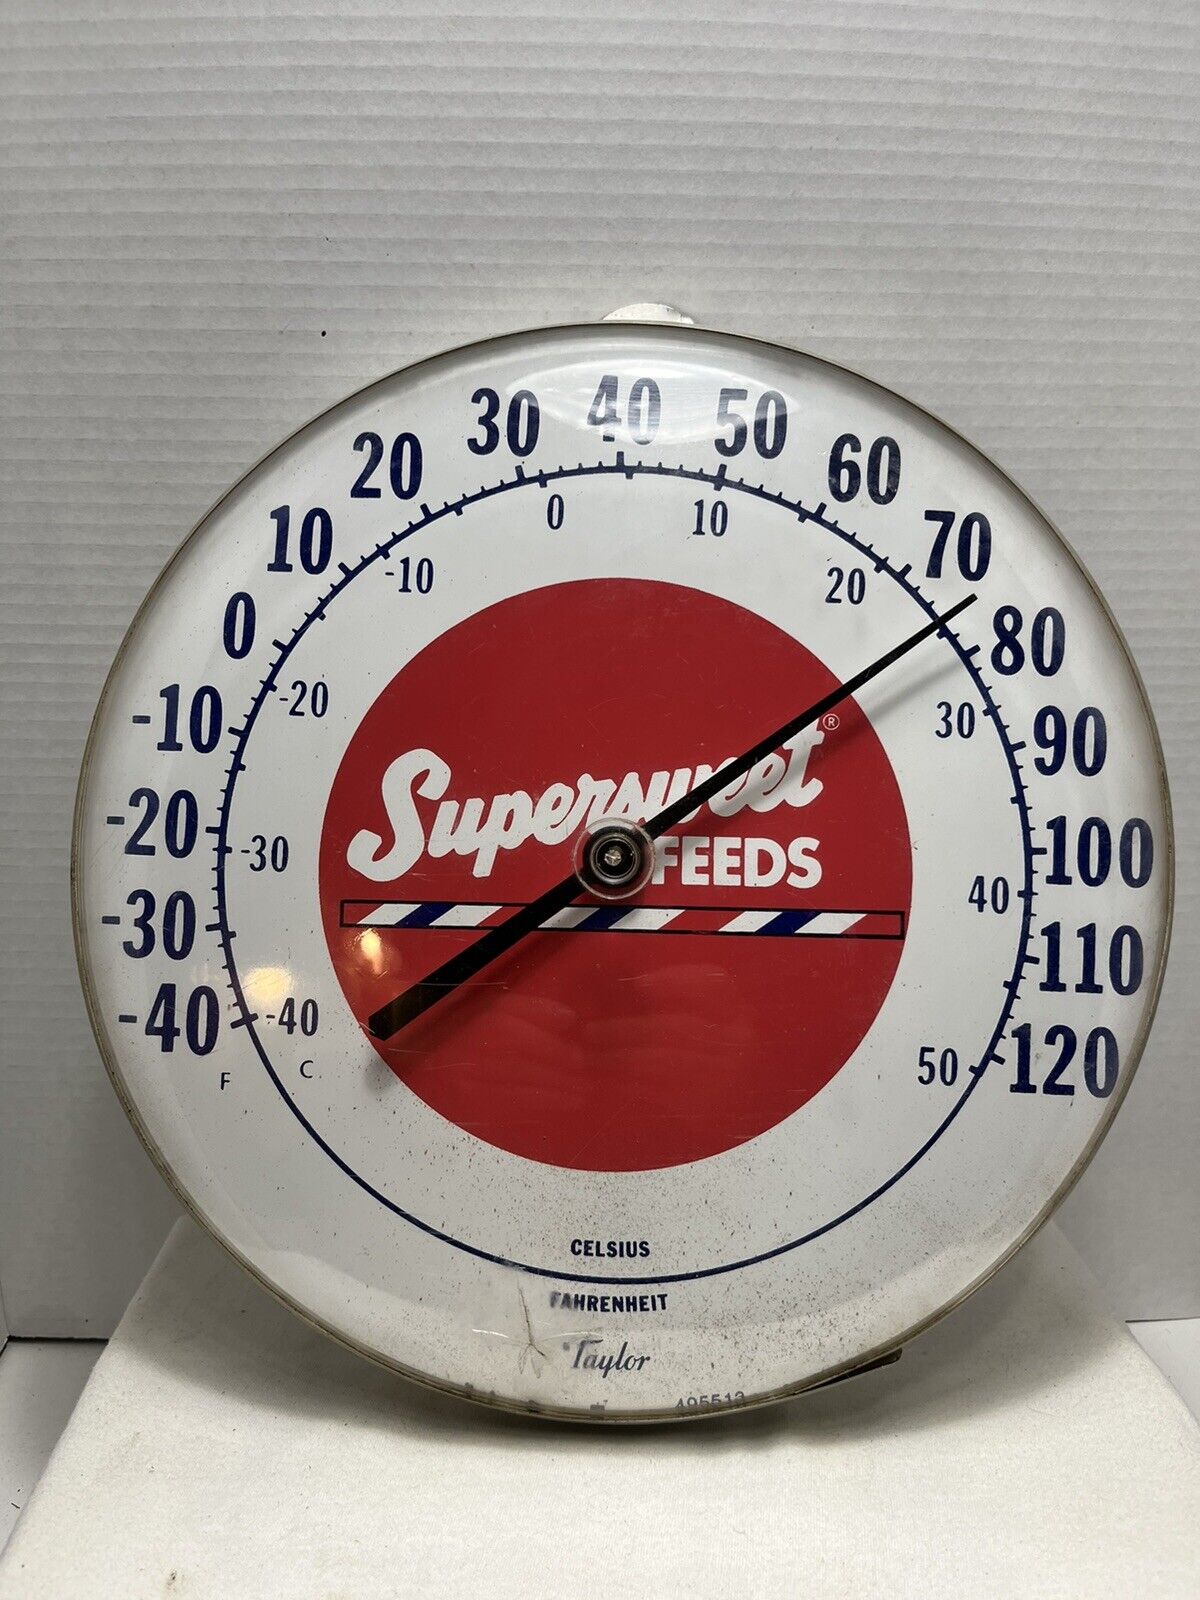 Vintage 12” Supersweet Feeds Advertising Thermometer TAYLOR 